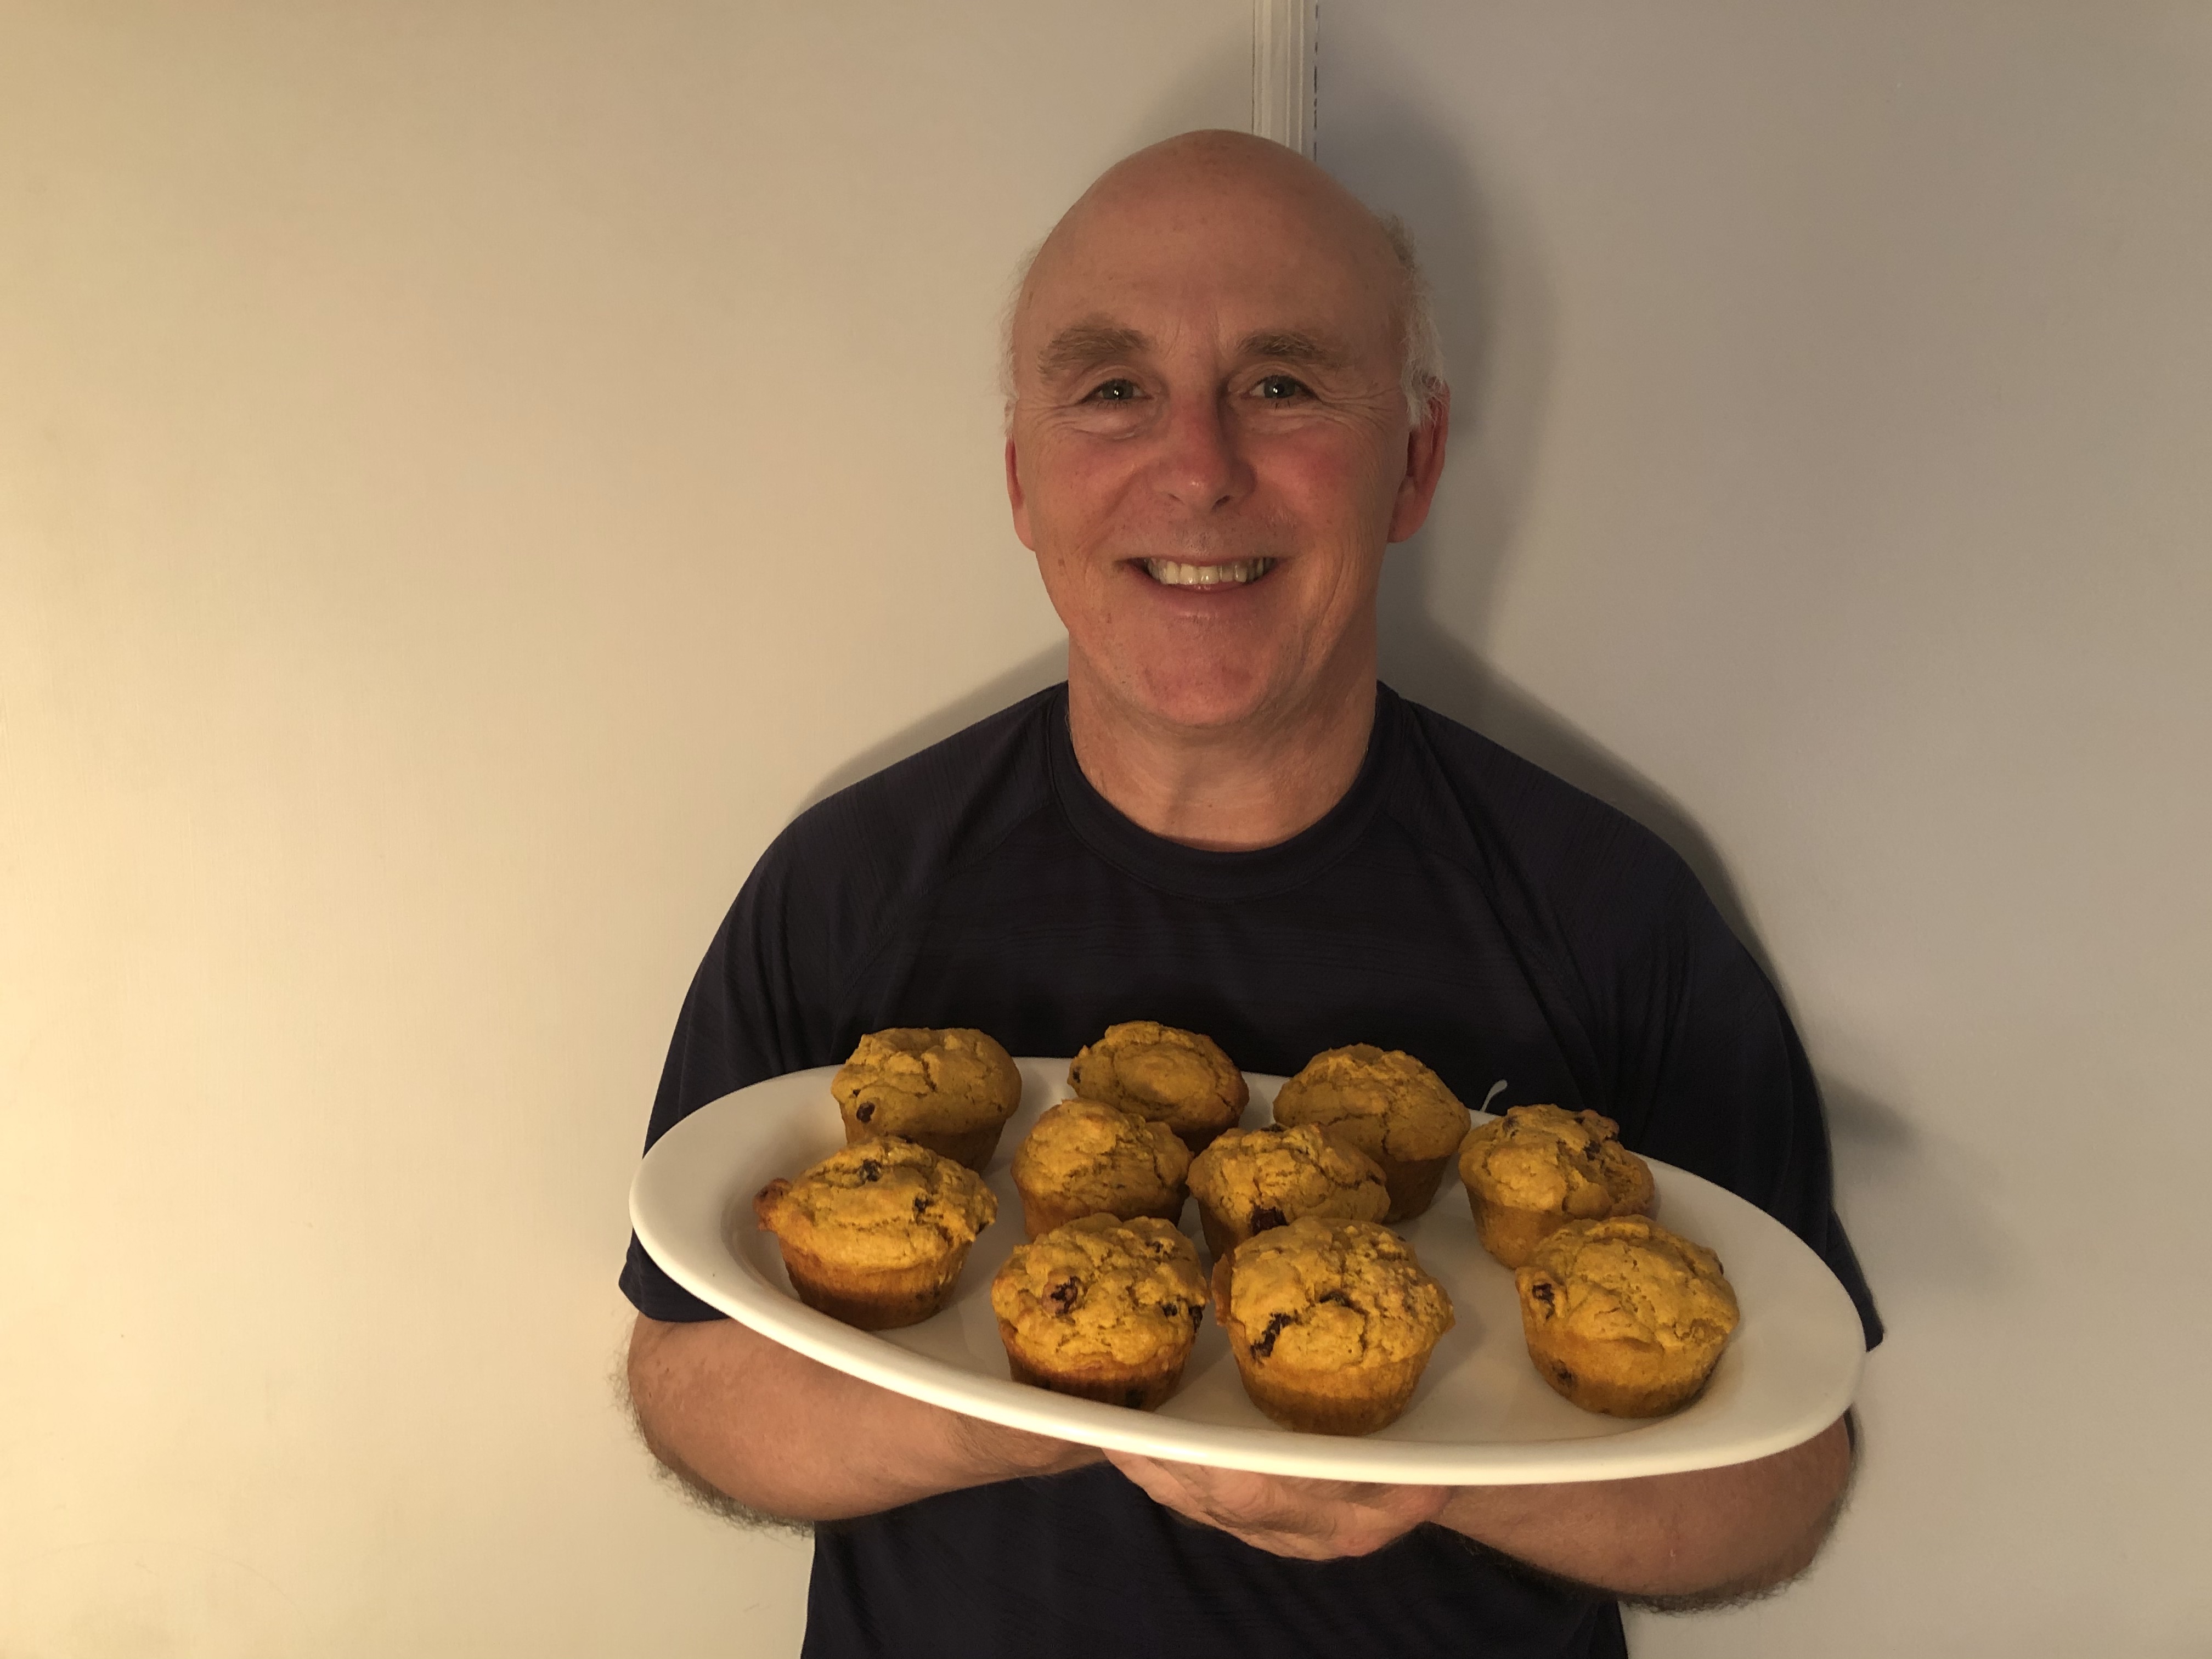 Chef Rob holding a plate of sweet potato muffins